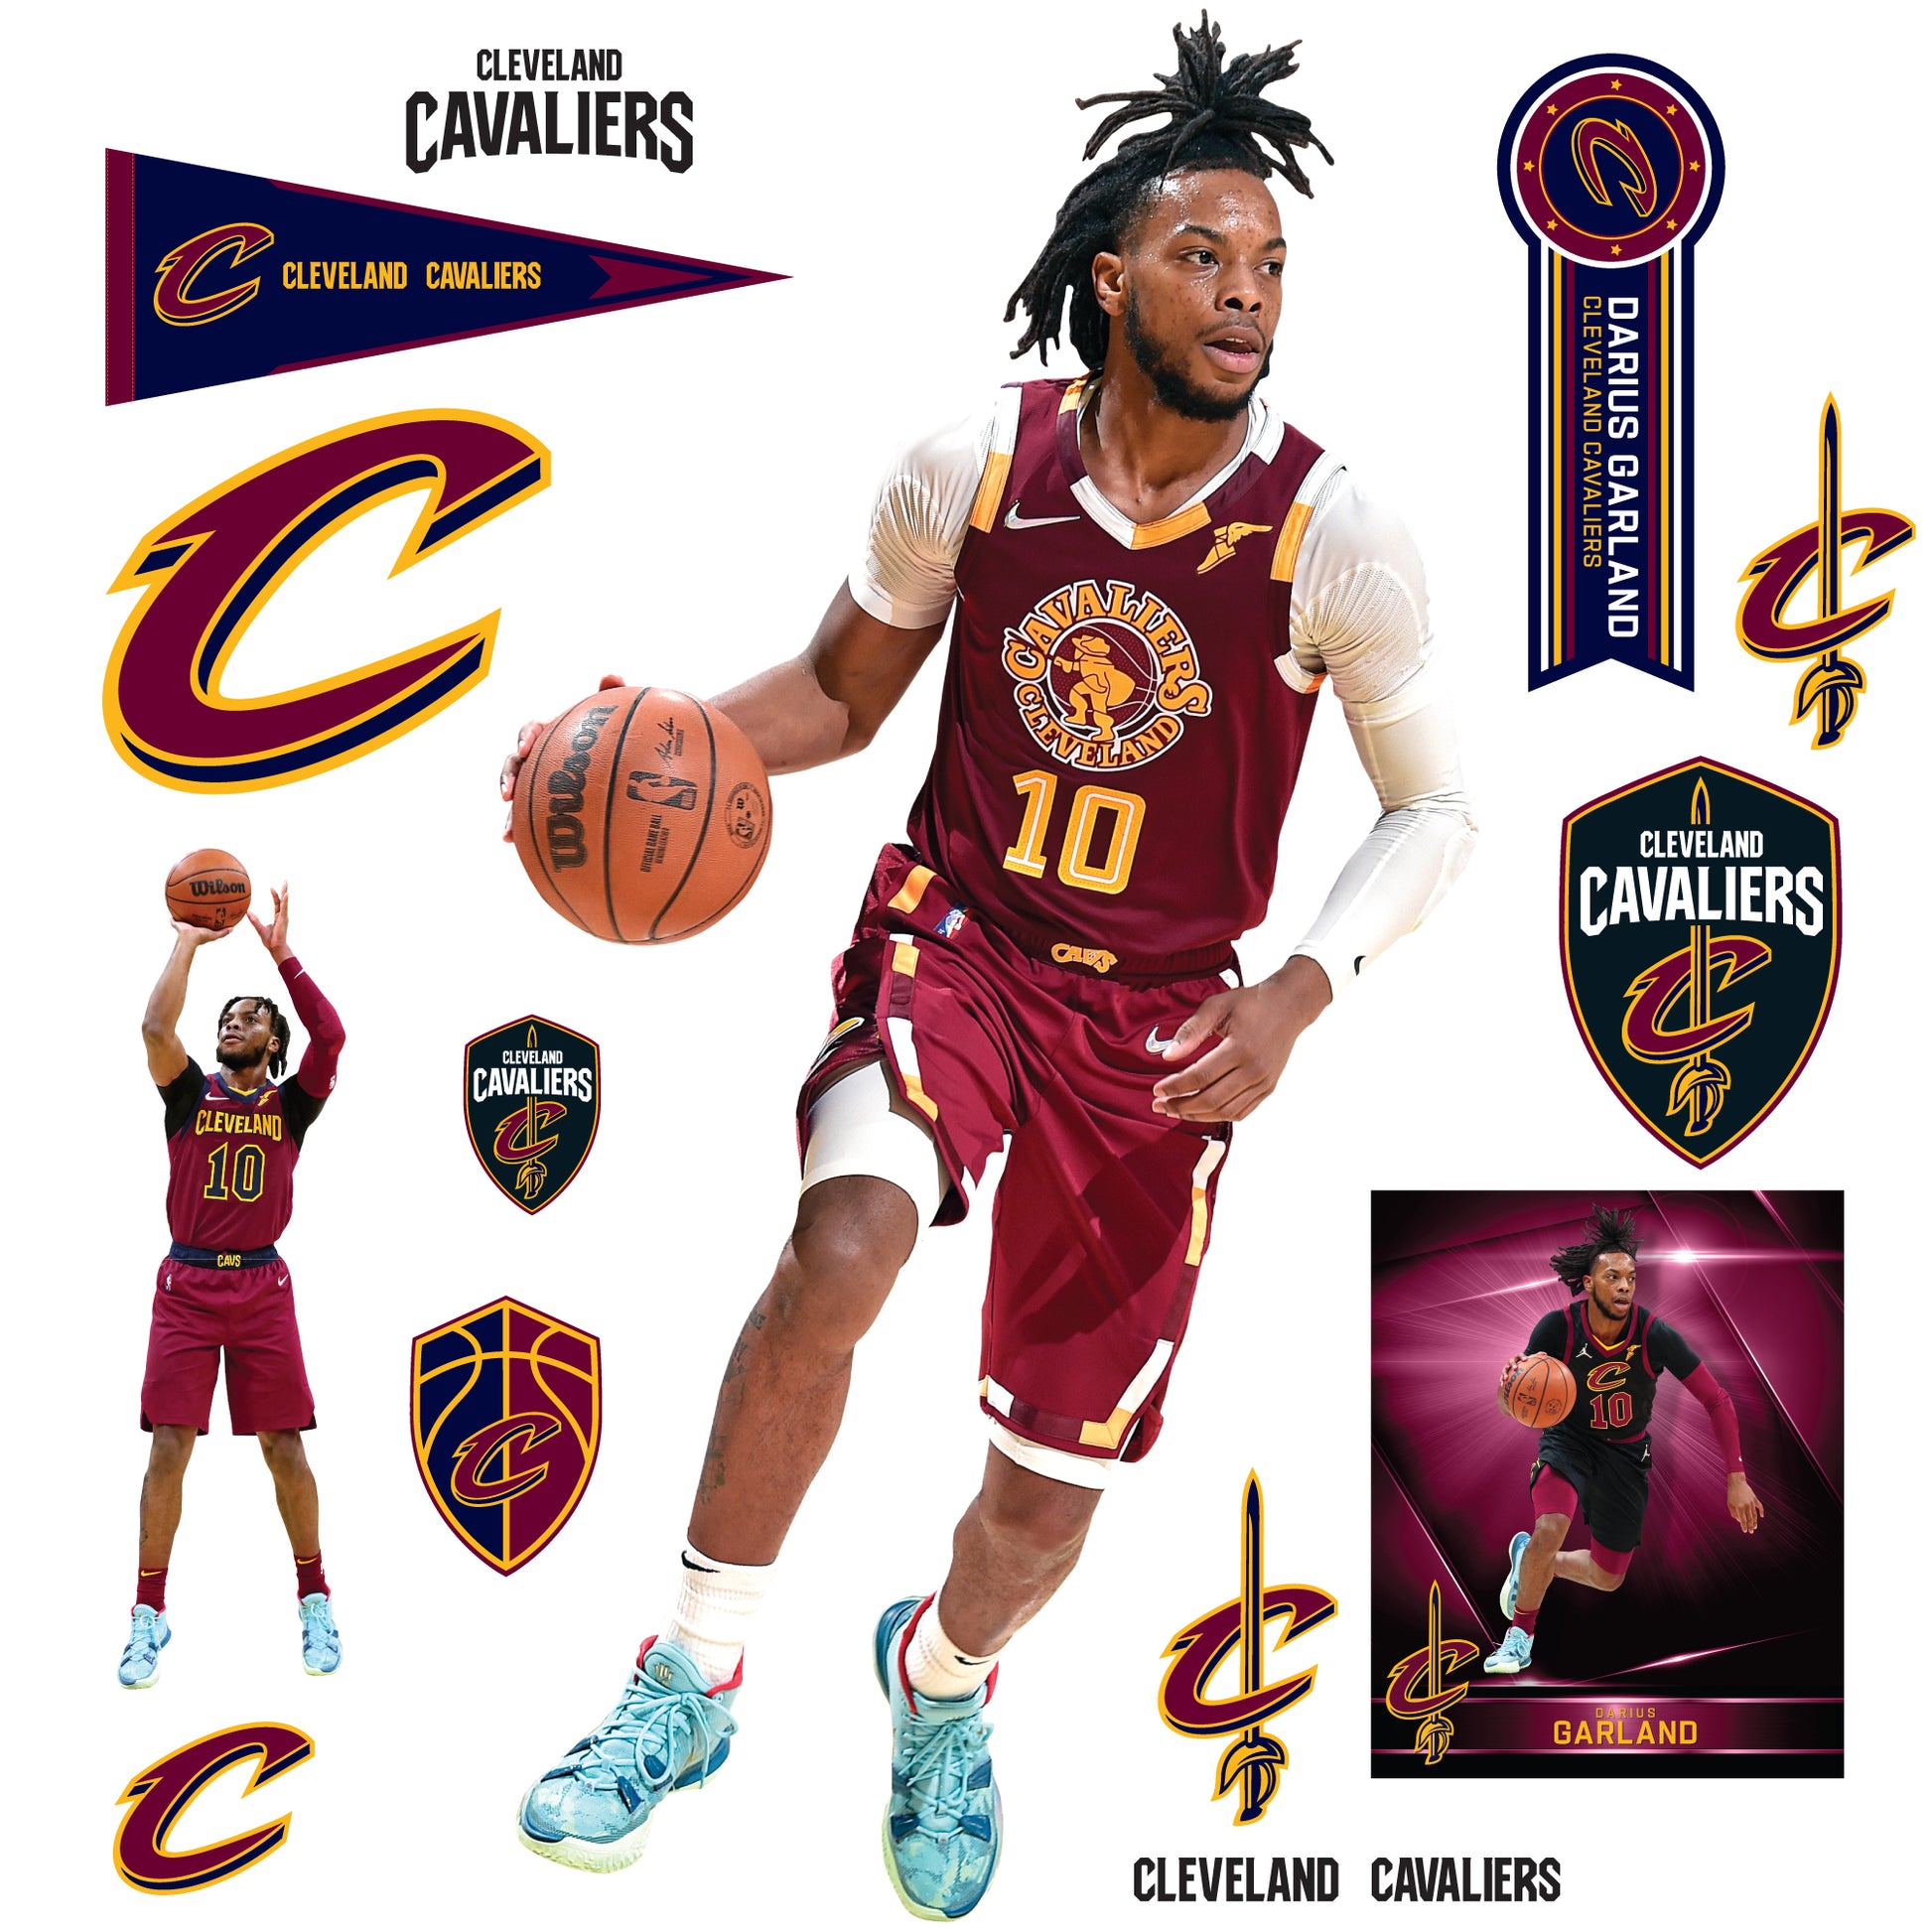  Cleveland Cavaliers NBA Officially Licensed Sticker